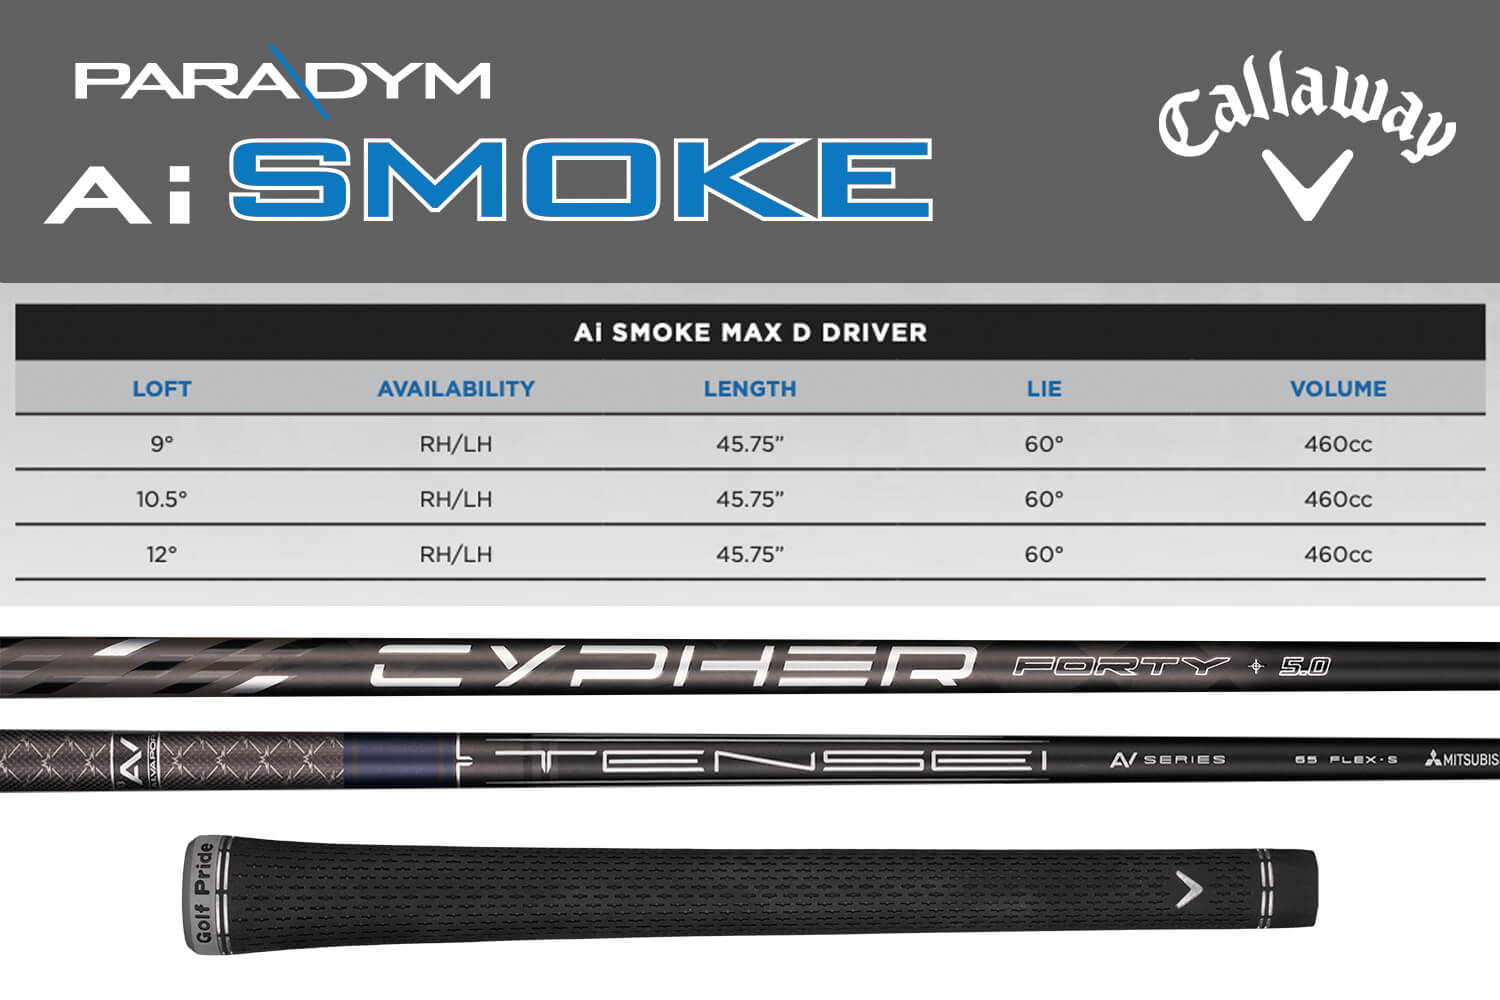 Specification for Callaway Paradym Ai Smoke Max D Golf Driver